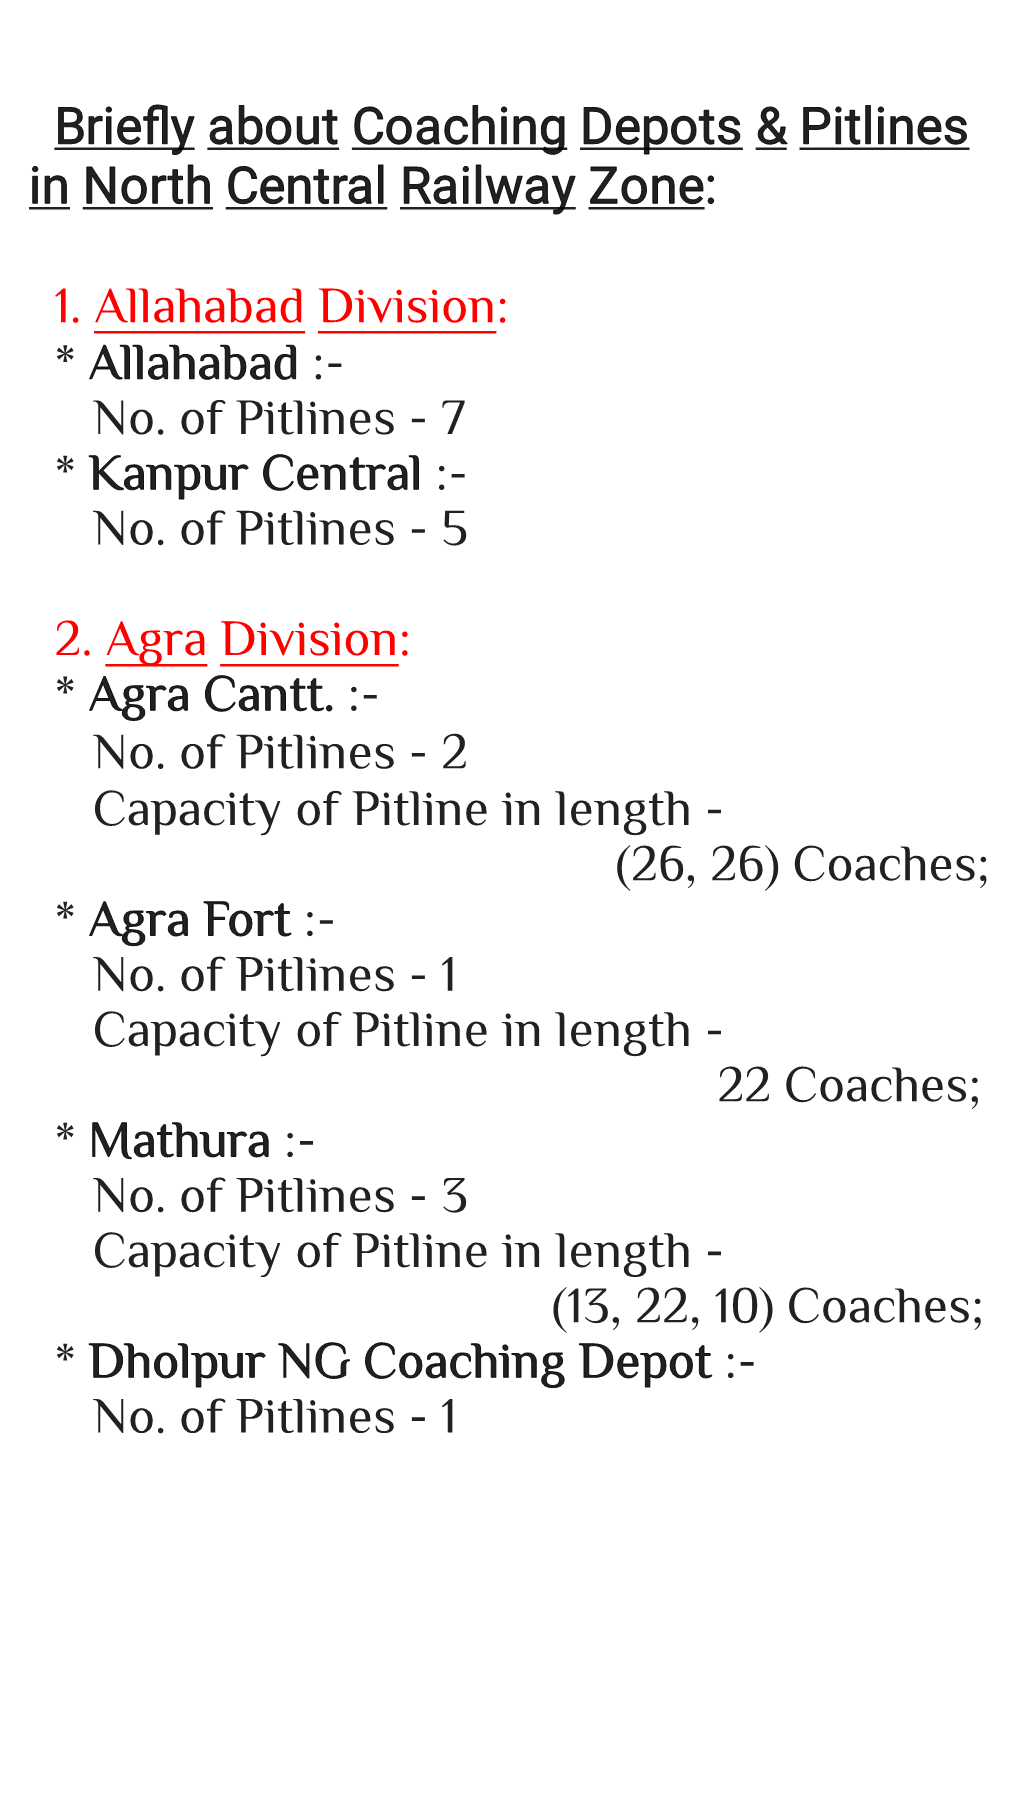 Briefly About Coaching Depots & Pitlines in North Central Railway Zone